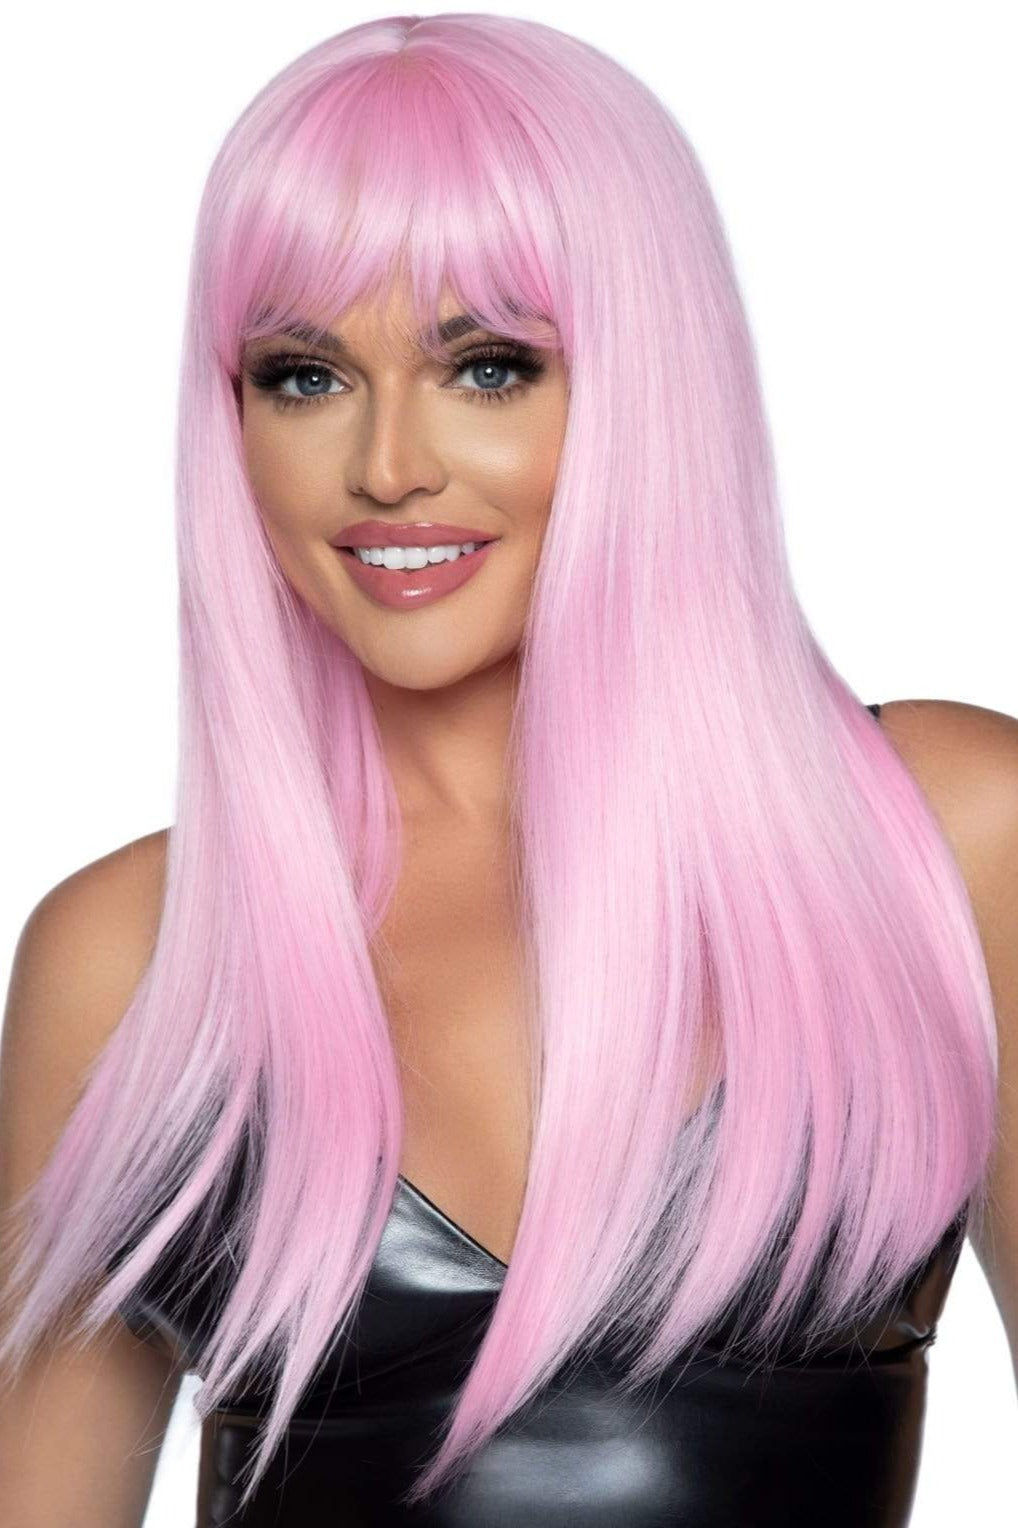 Long Straight Wig with Bangs